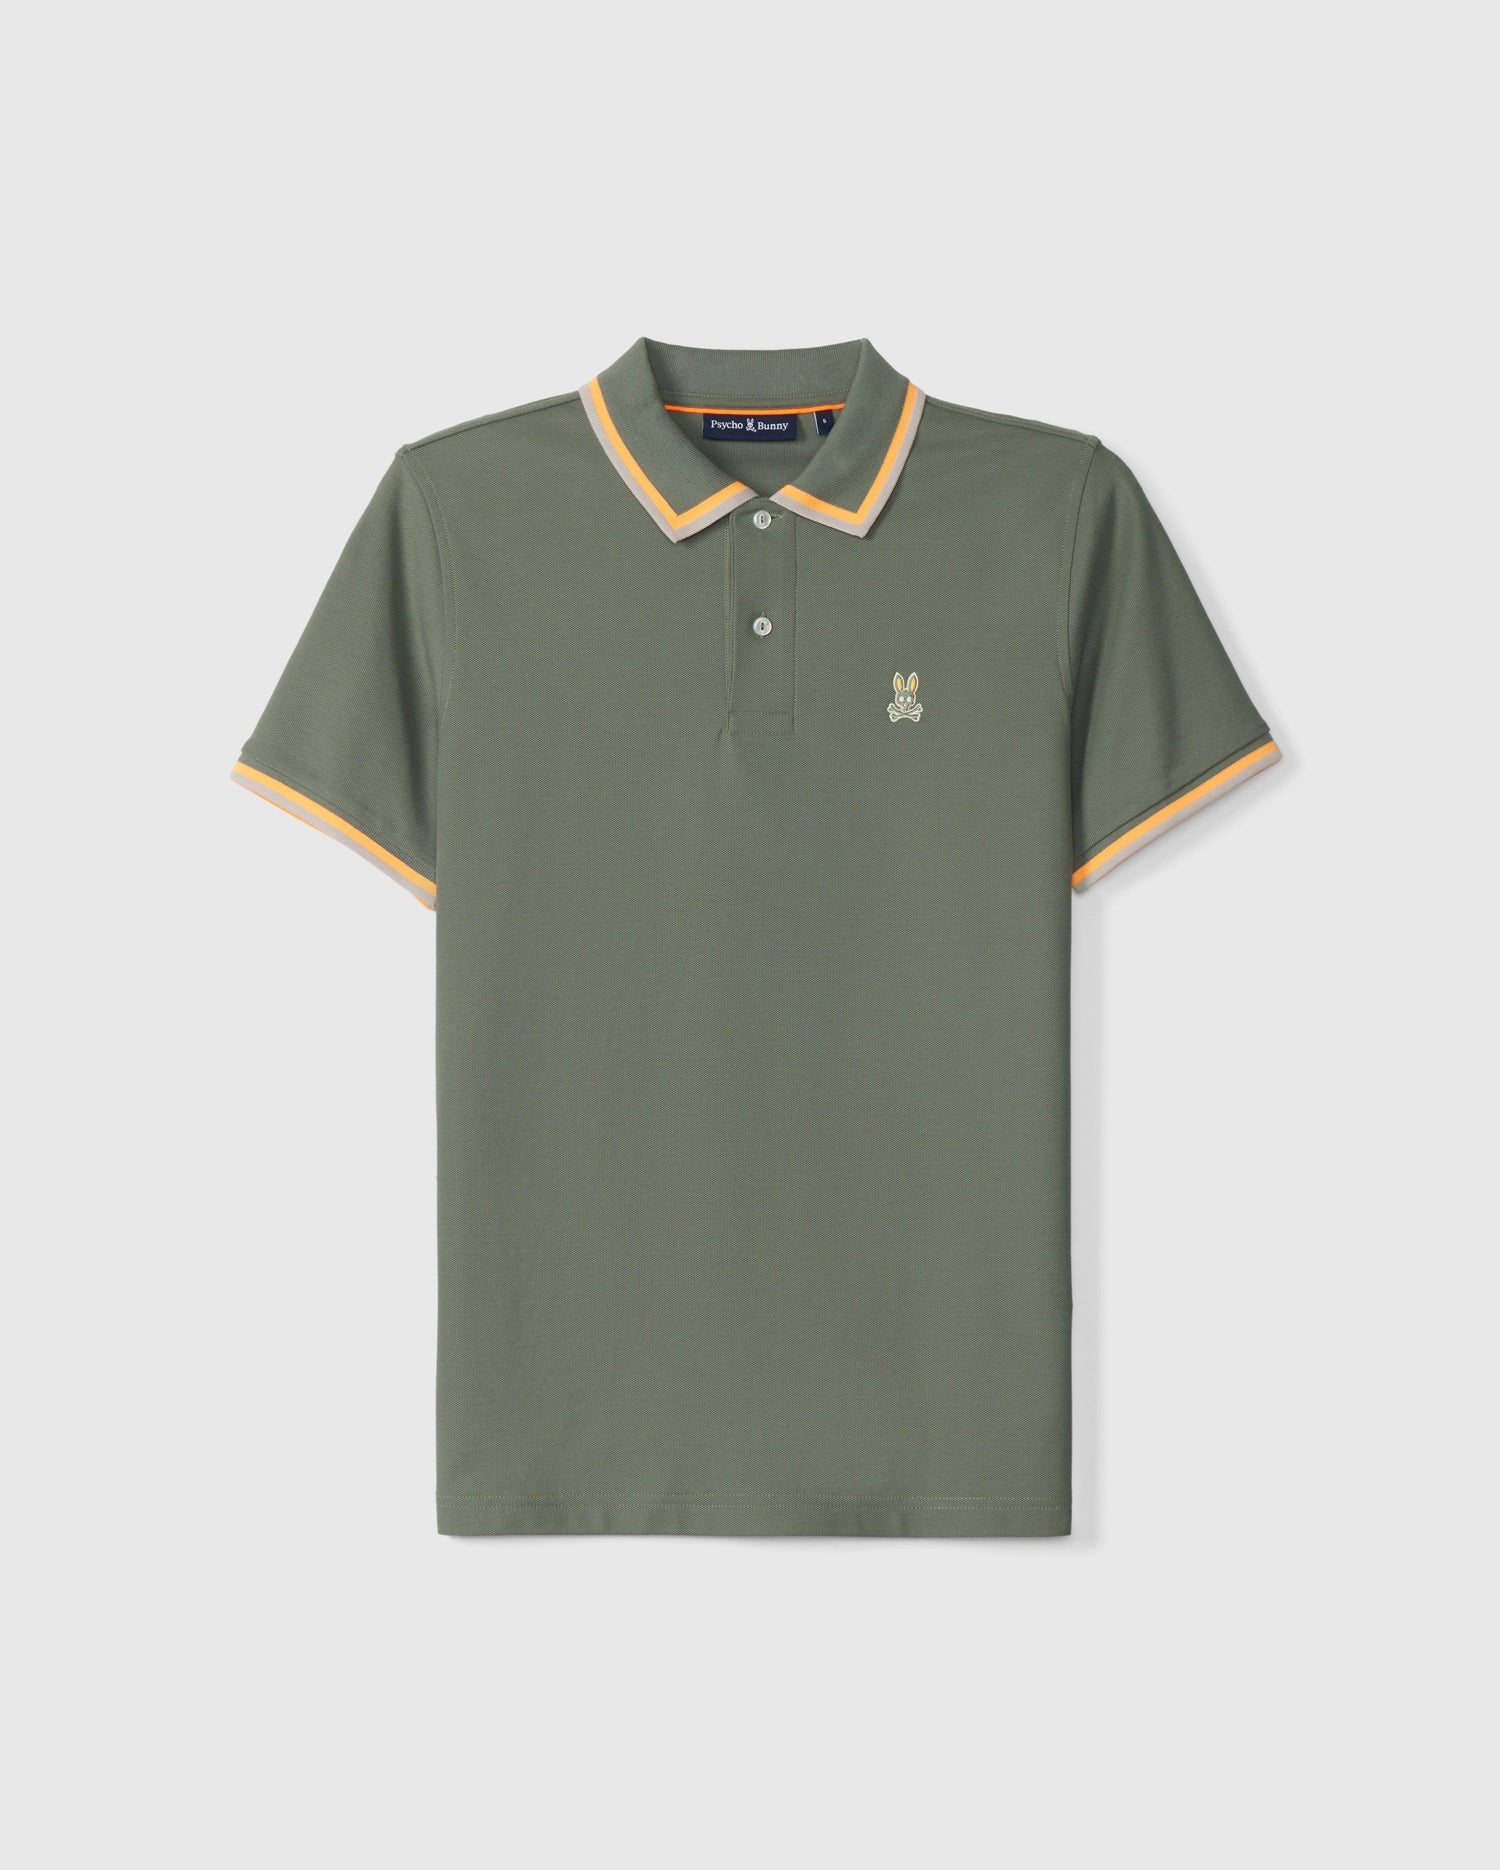 A green short-sleeved polo shirt with a yellow collar and sleeve trim. It features a small embroidered logo of a yellow rabbit on the left chest. The **Psycho Bunny MENS KINGSBURY PIQUE POLO SHIRT - B6K235B200** boasts a classic silhouette with contrasting stripes and has a classic buttoned neckline, made of soft, comfortable fabric.